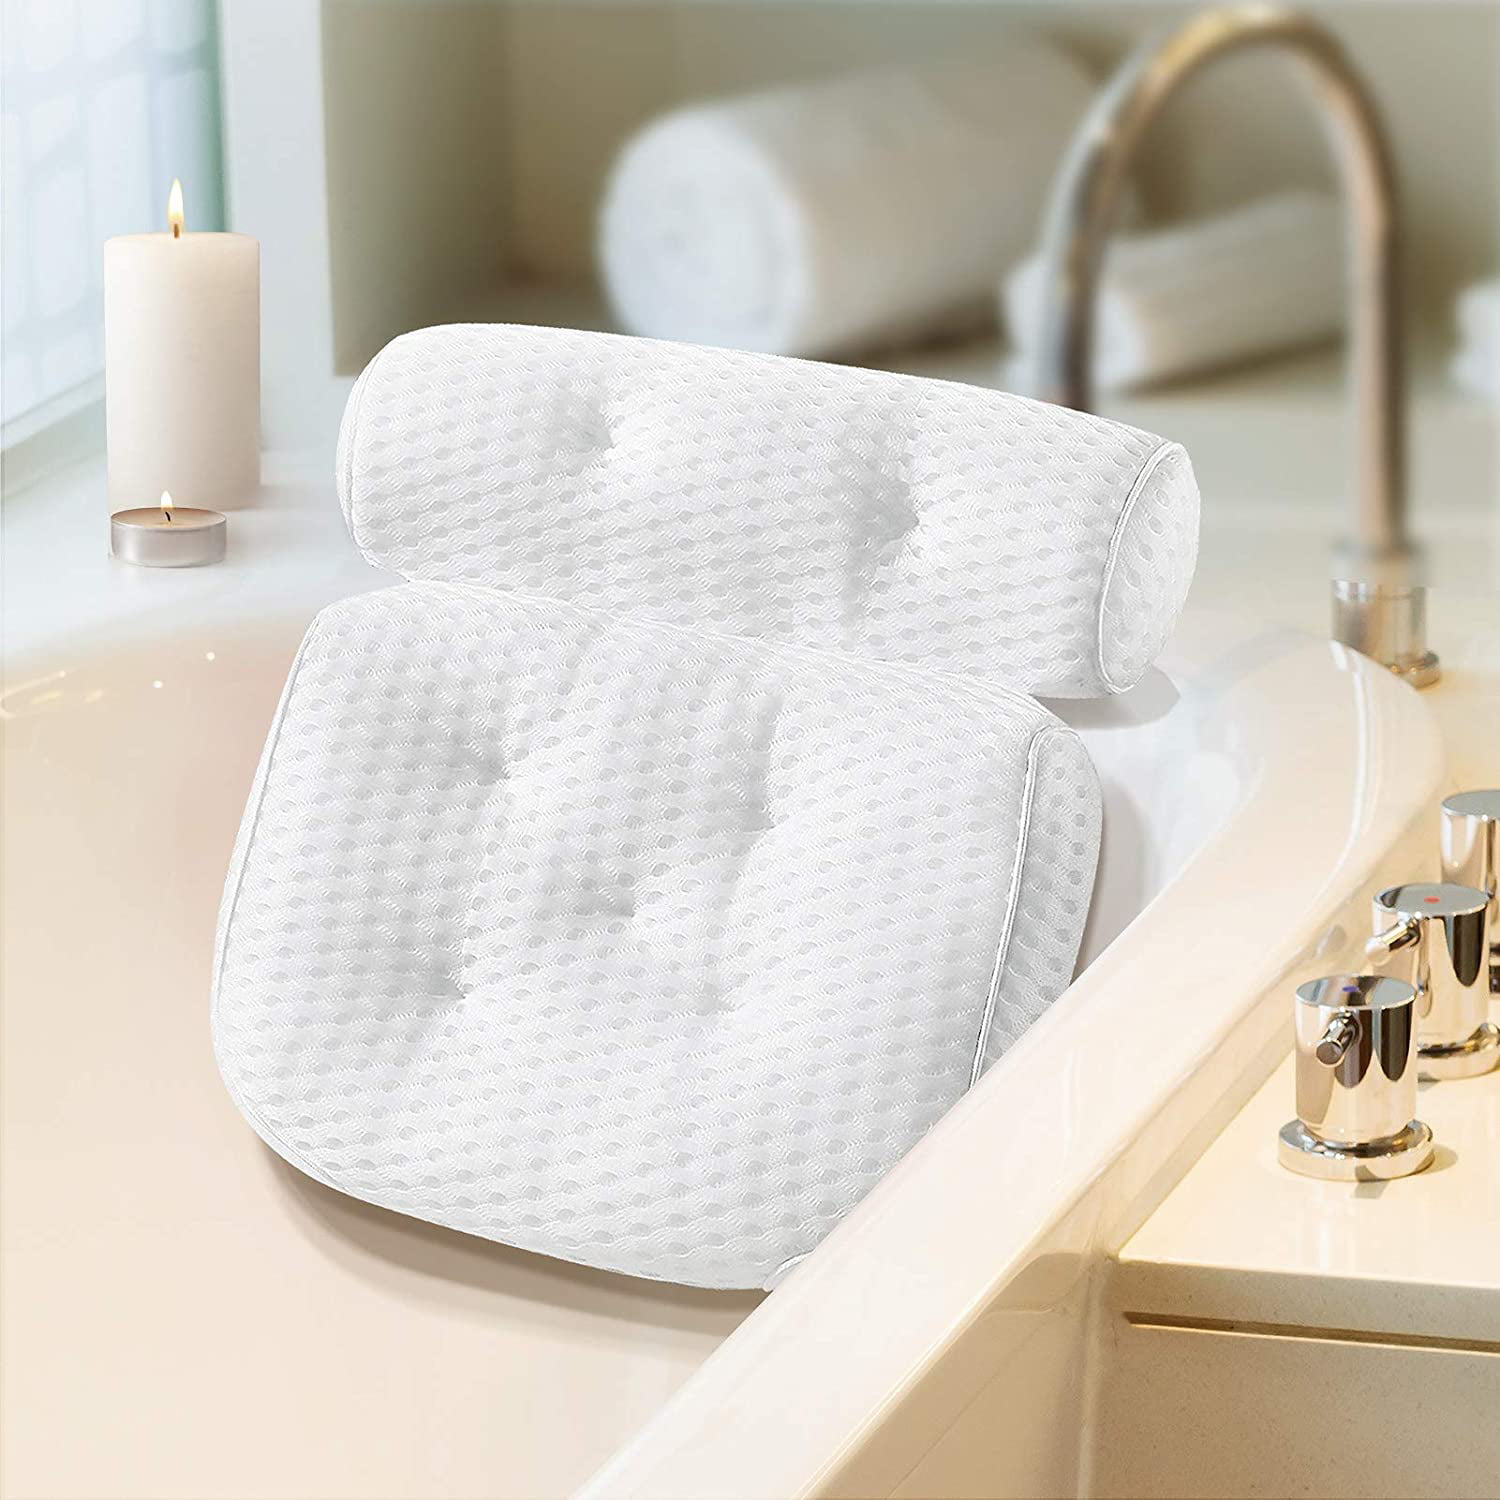 Spa Bath Pillow With Suction Cup Non-Slip Head Shoulder Neck Support Mesh Tub 